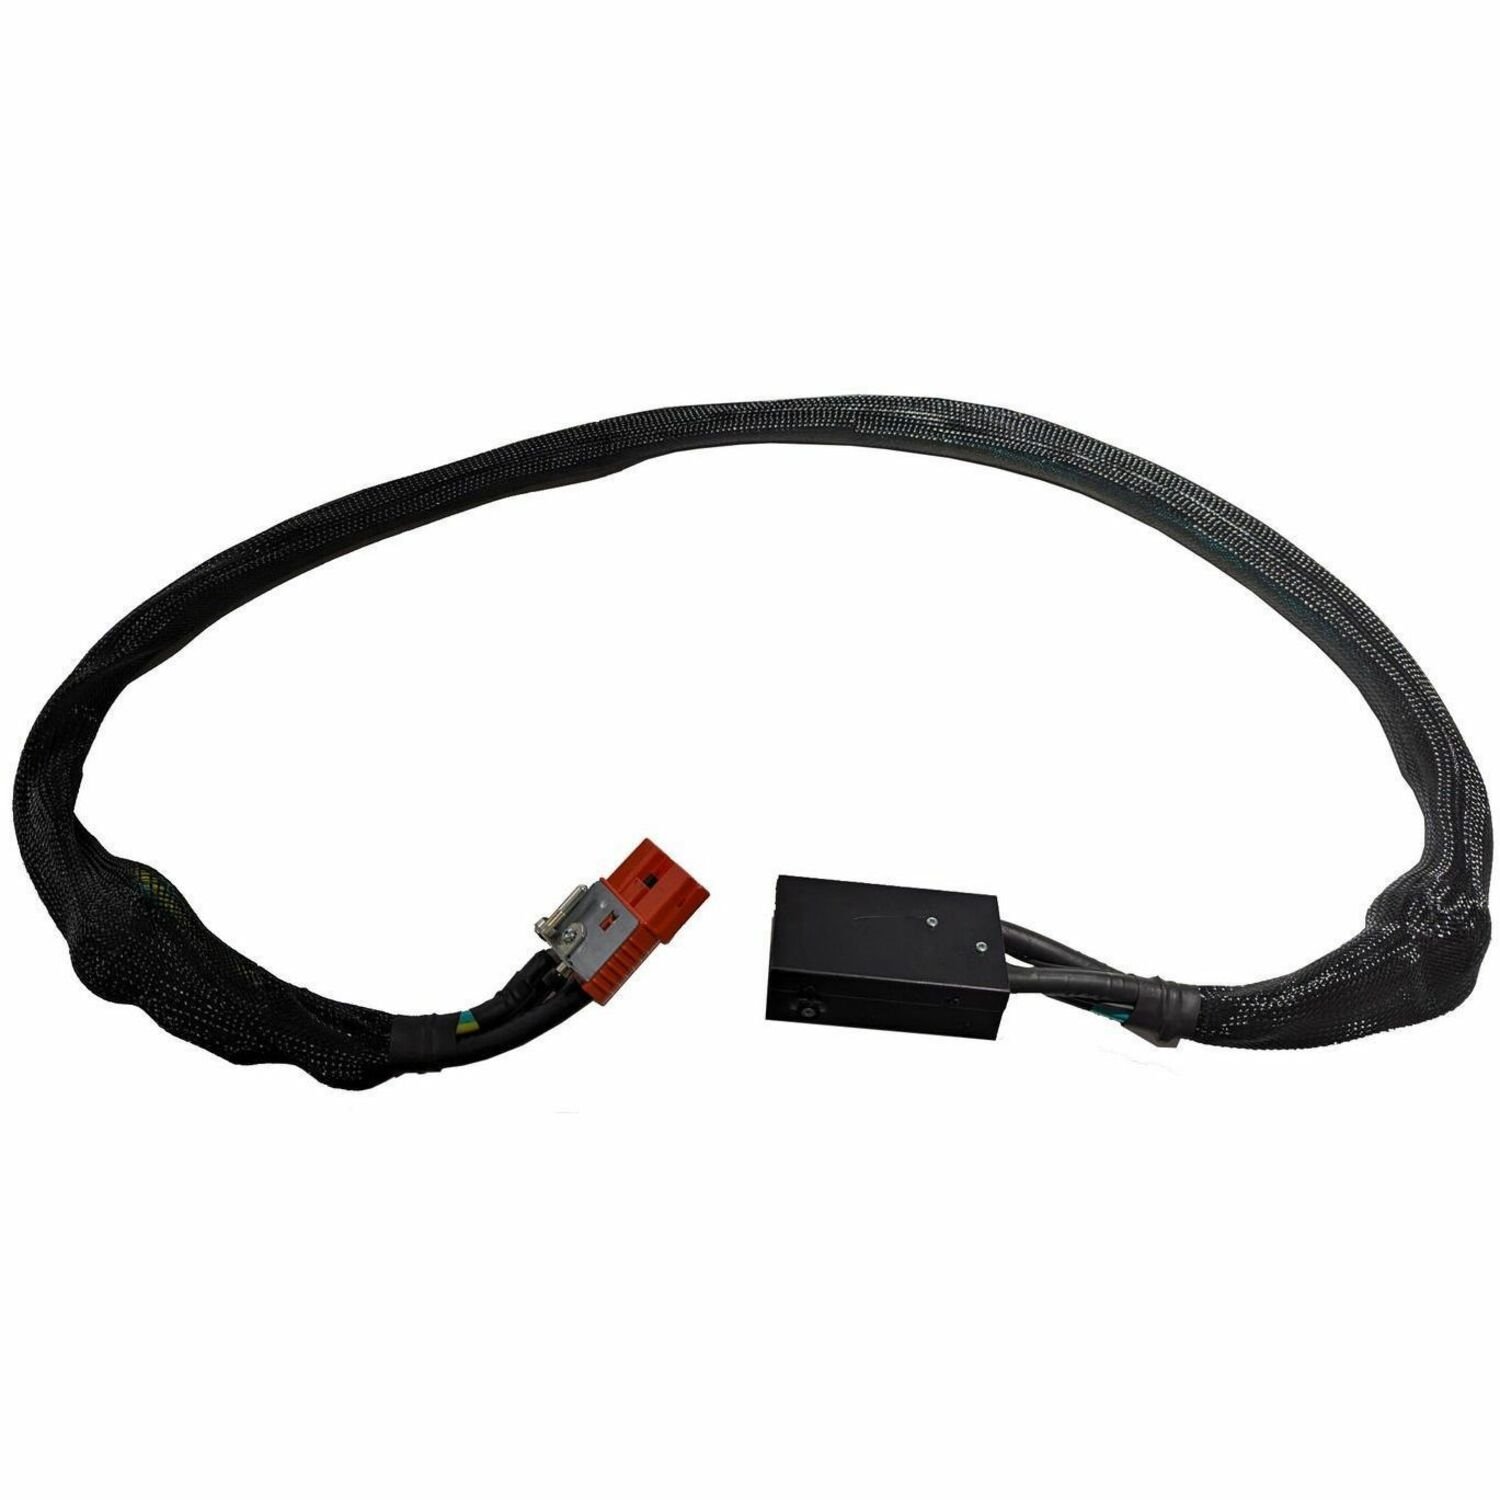 APC by Schneider Electric Smart-UPS Modular Ultra 8 Ft. Battery Cable Ext. For External Battery Pack